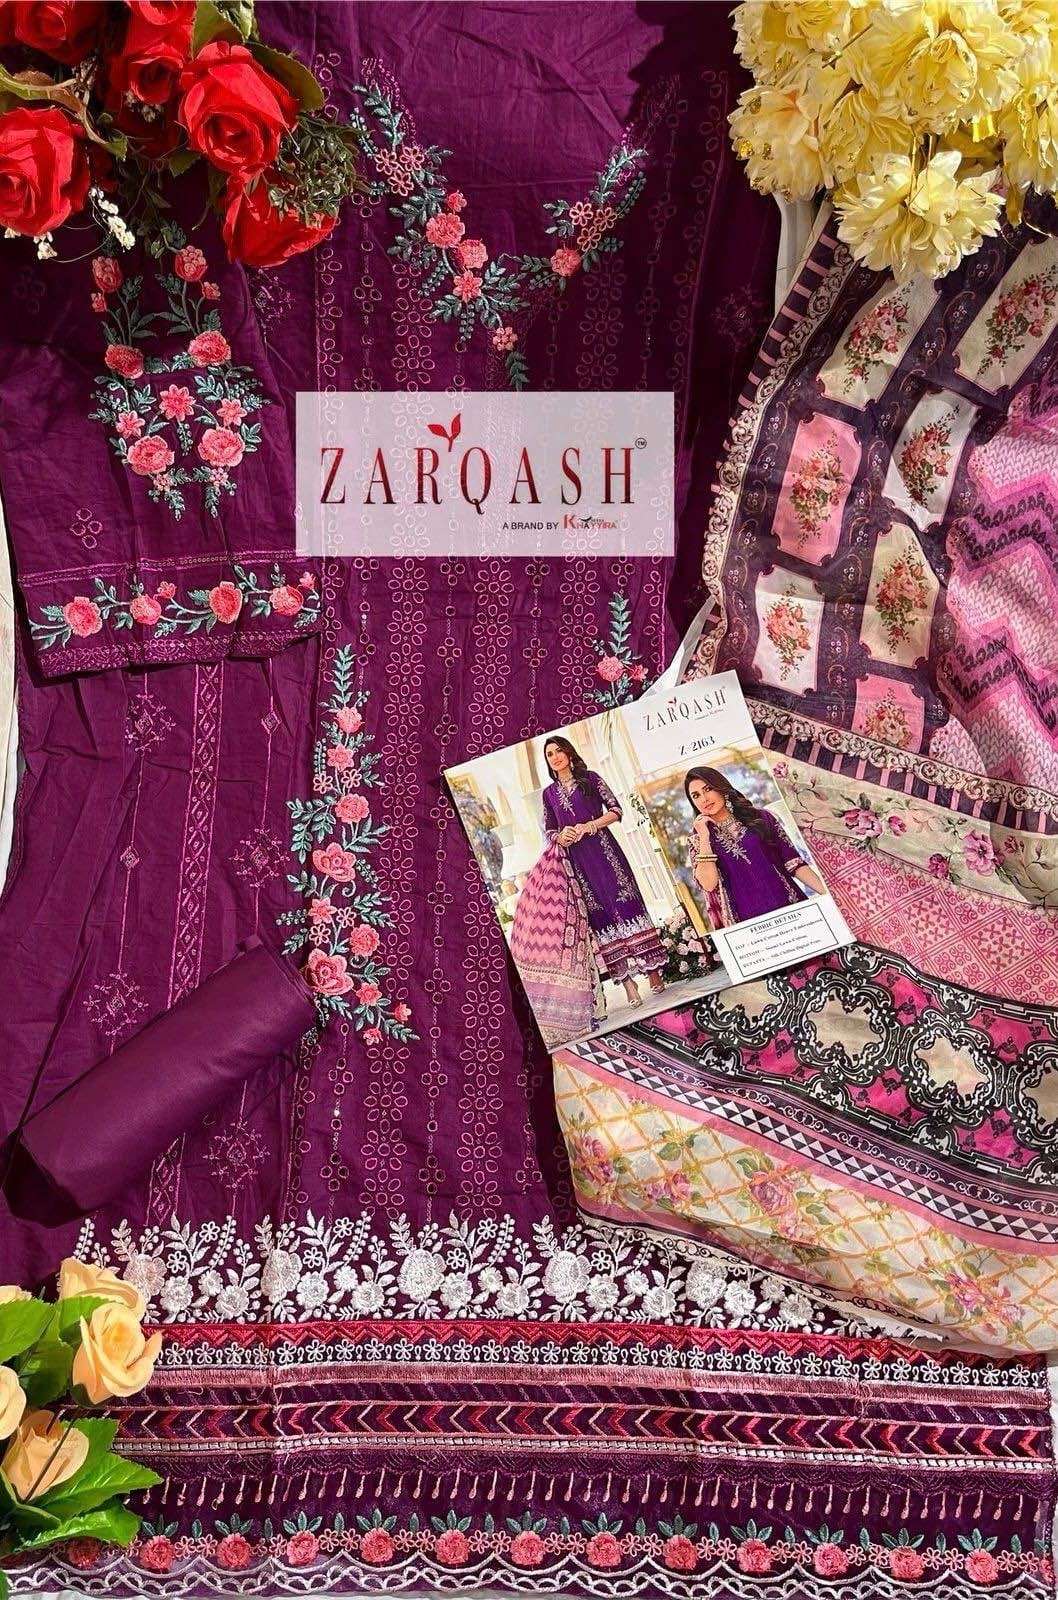 Zarqash Z 2161 To 2165 Cotton Embroidered Salwar Suit Wholesale catalog